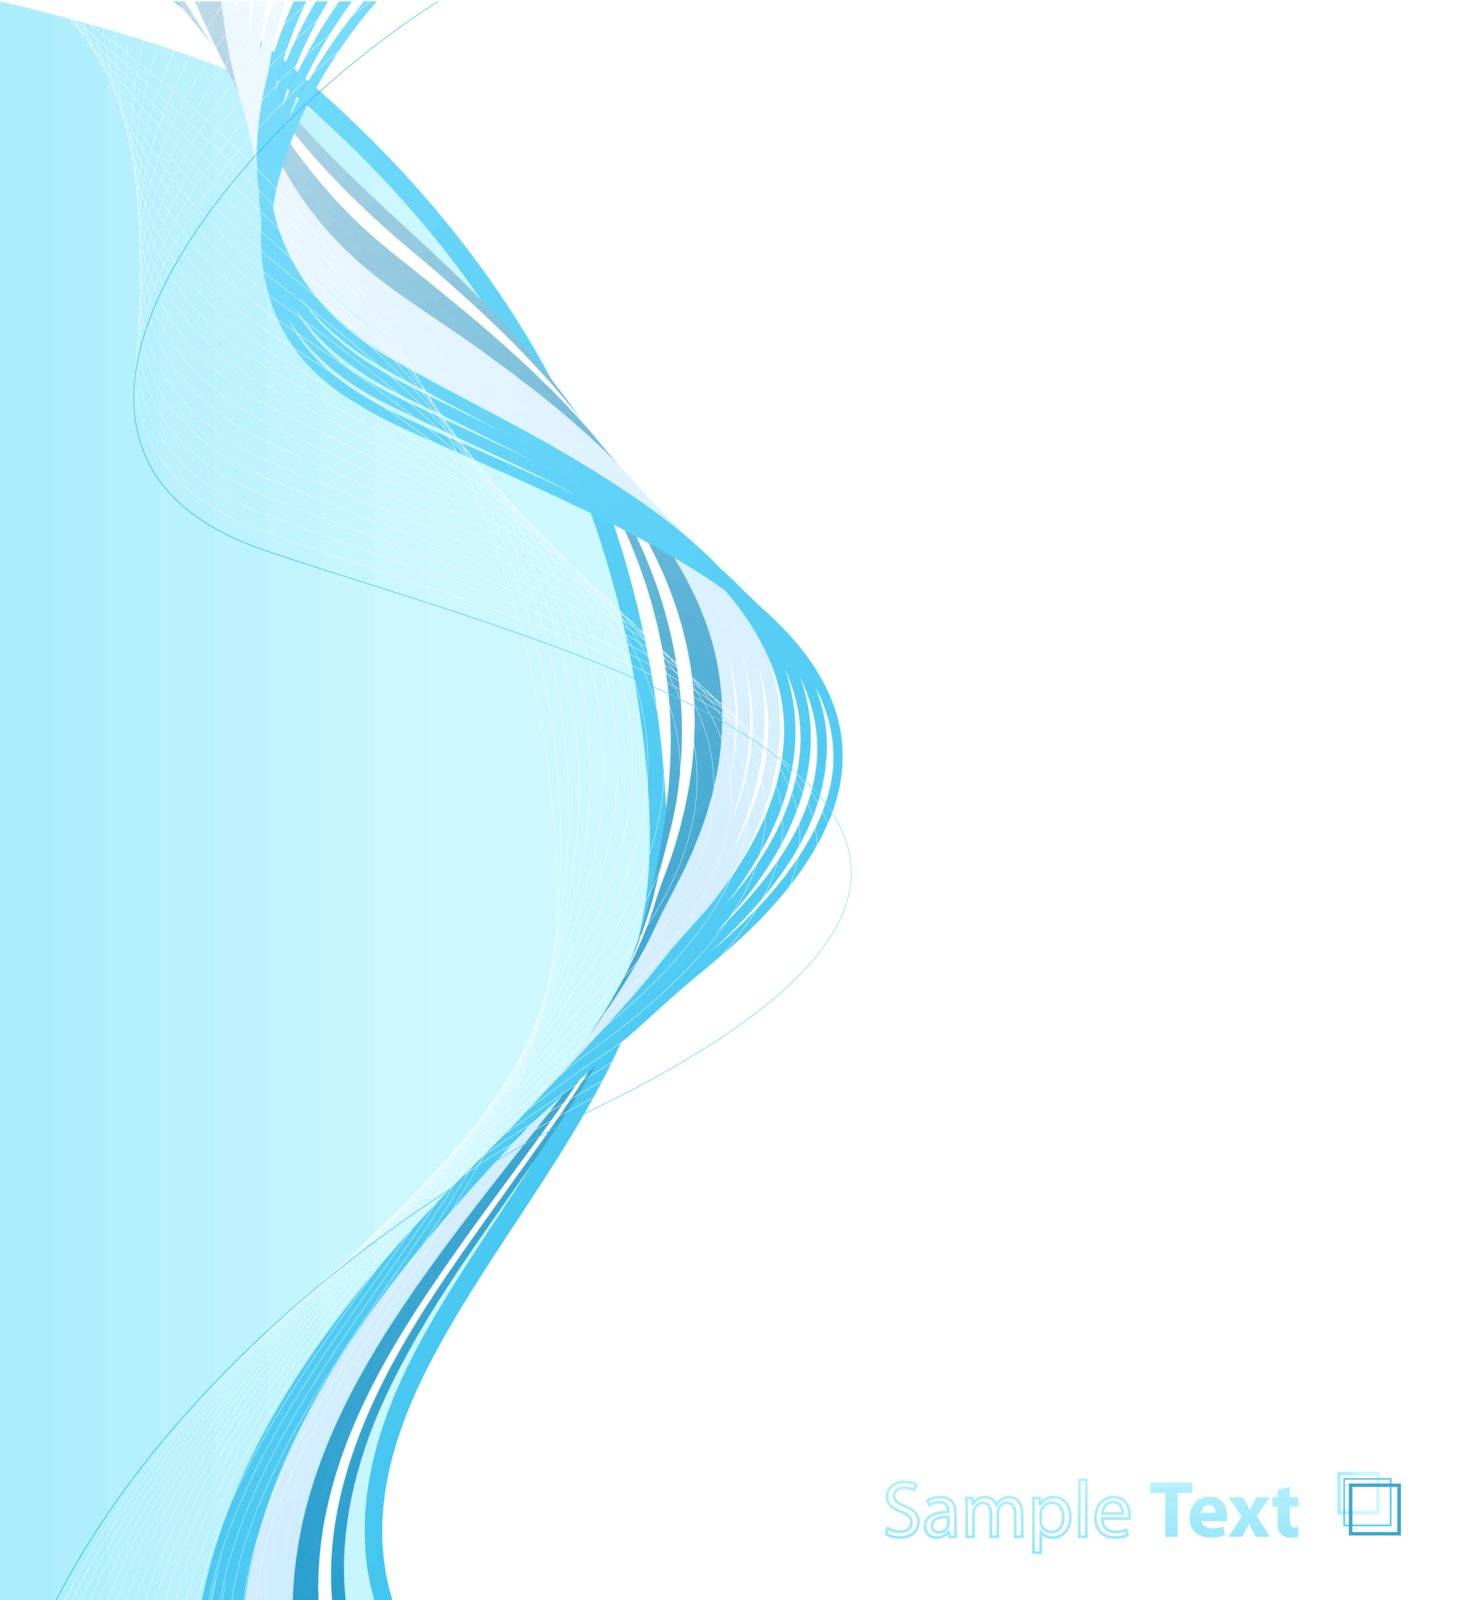 Vector illustration of a stylized blue lined art abstract sheet.